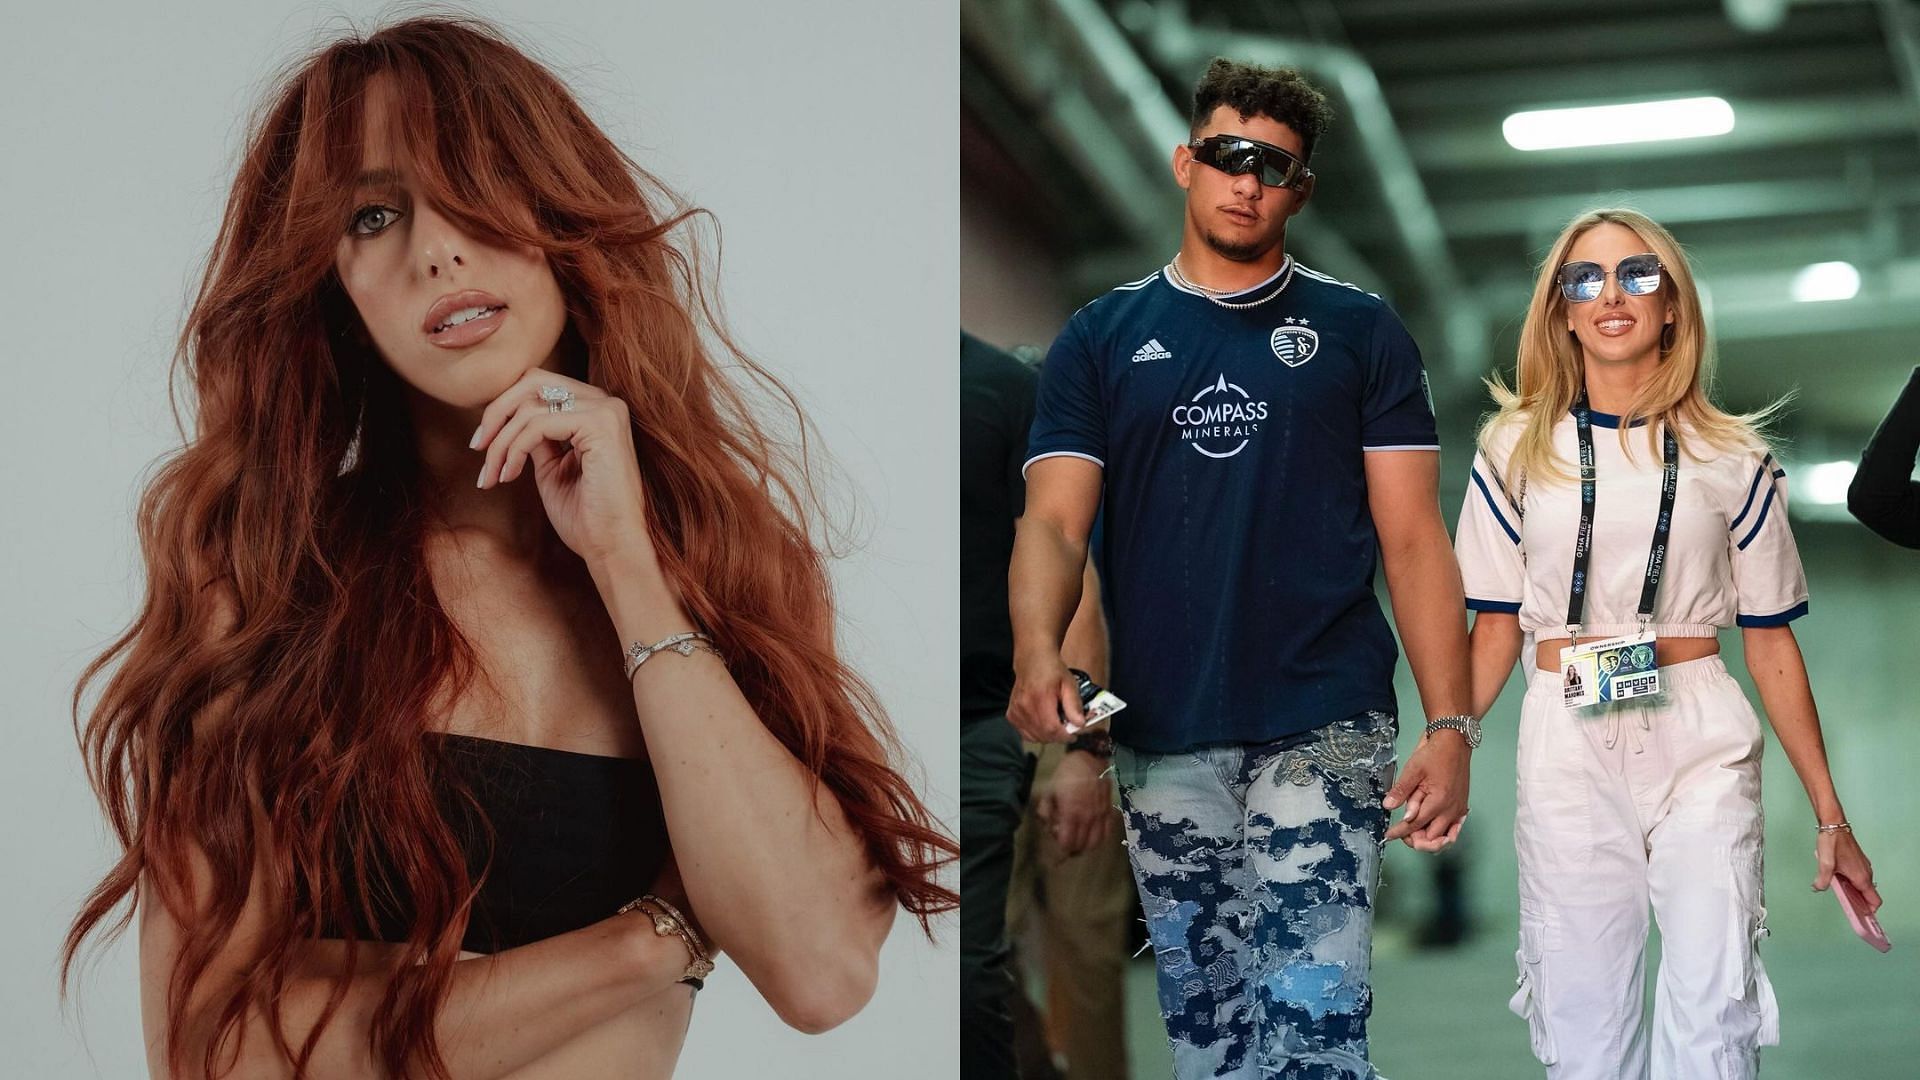 Brittany Mahomes dyed her hair red for a photoshoot - then returned to blonde